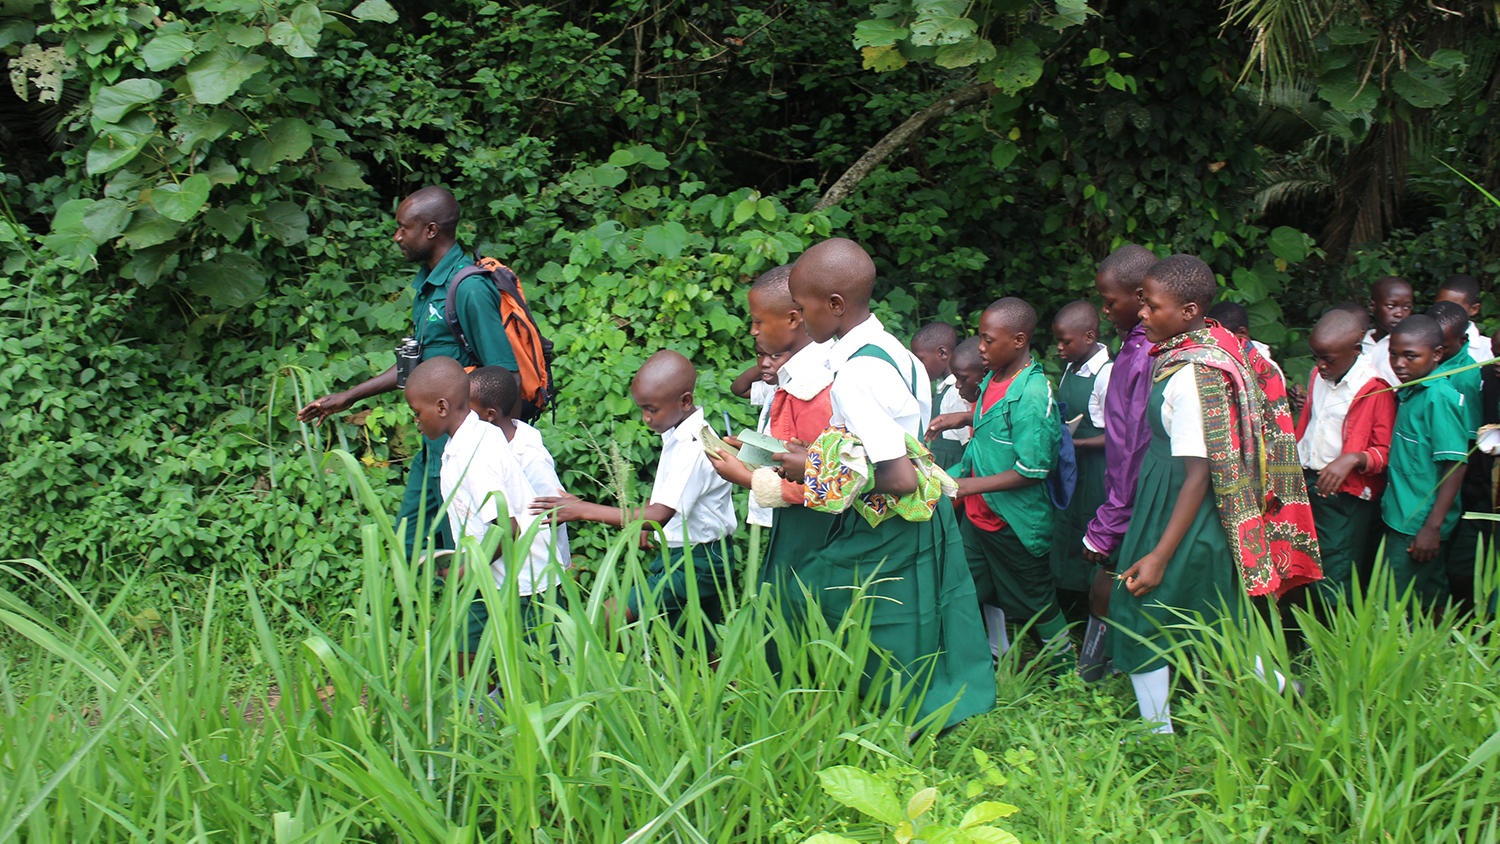 A group of students on a nature walk in Uganda